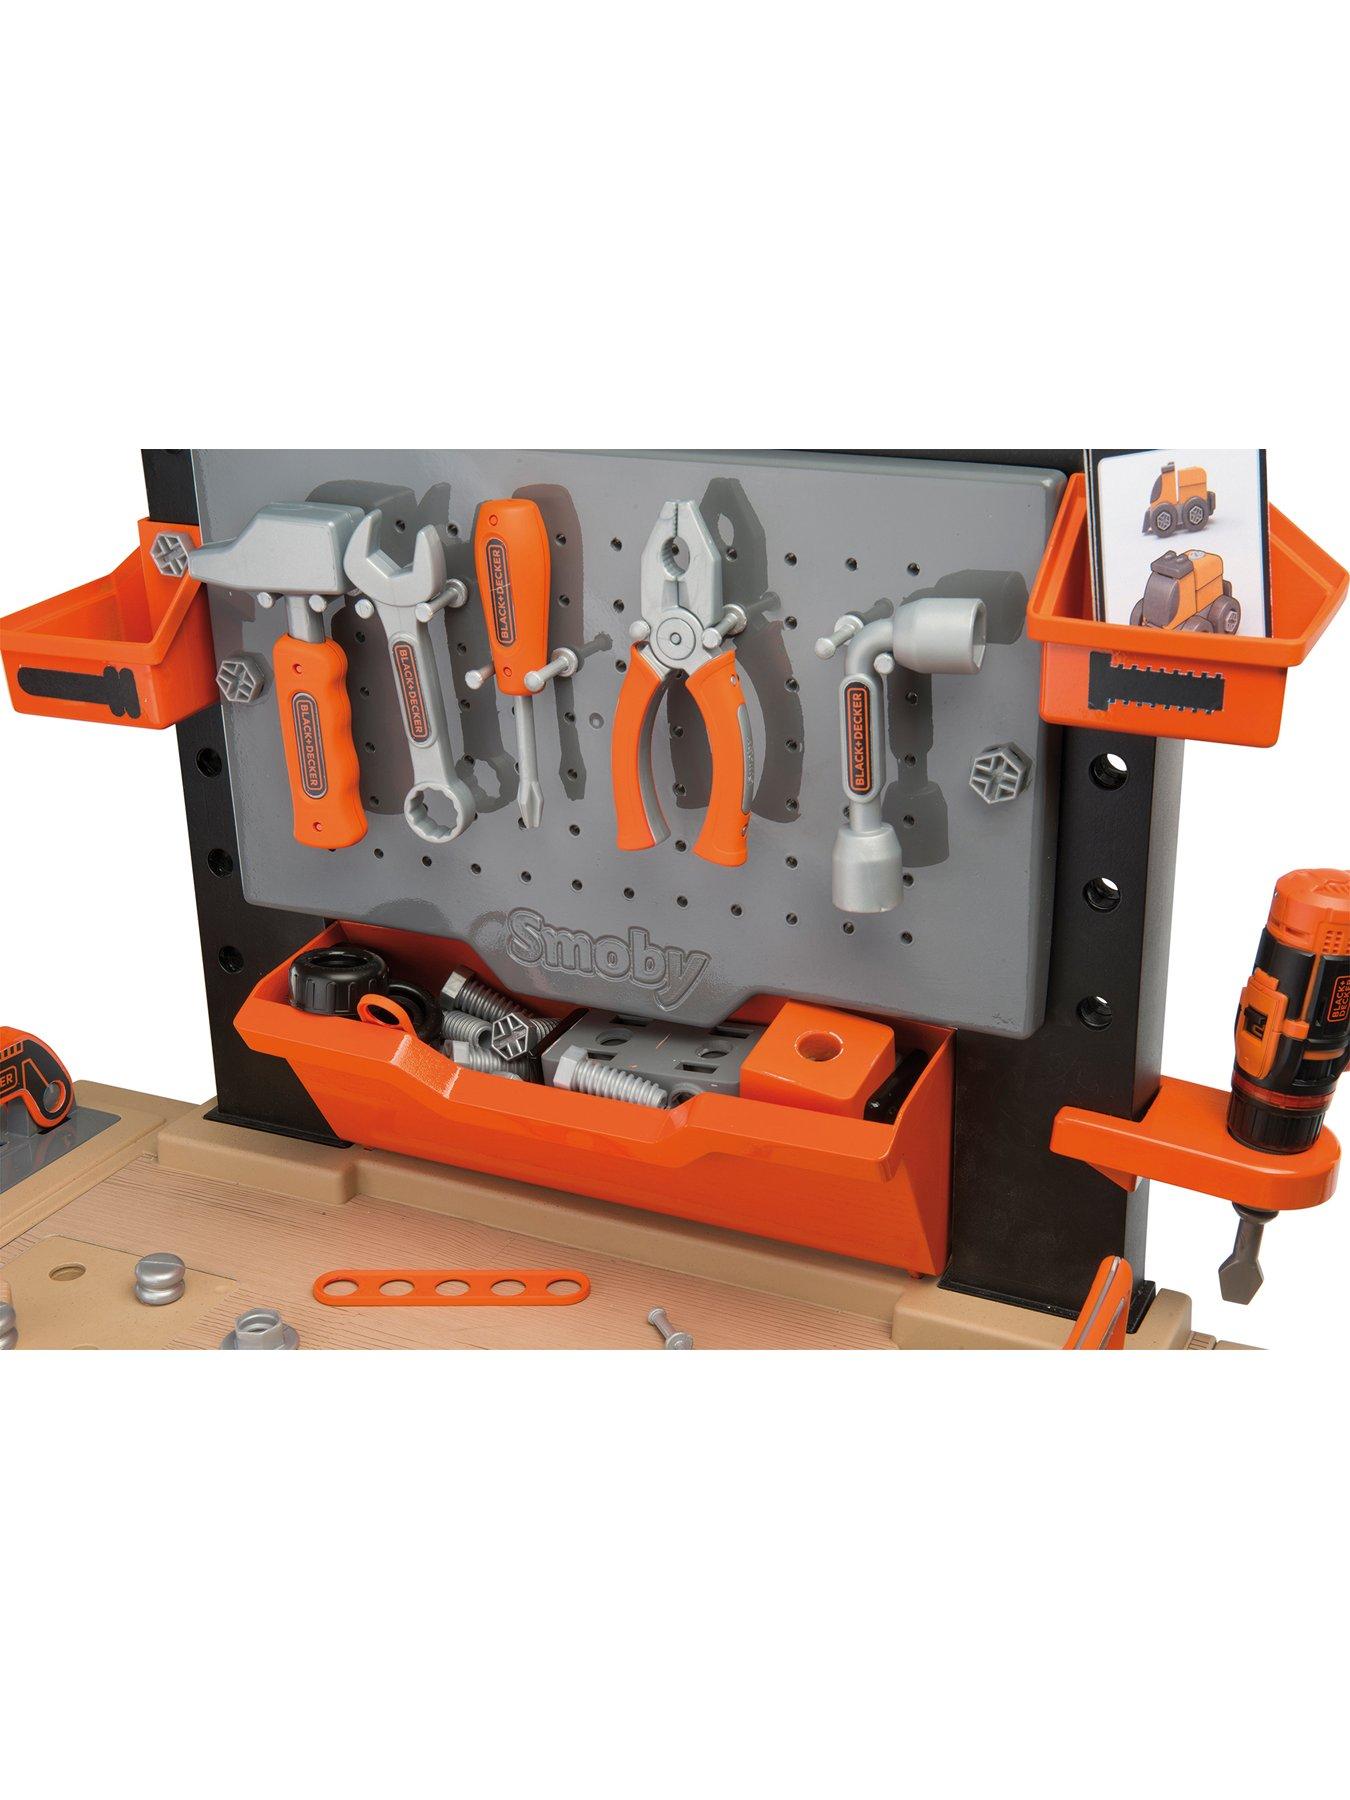 Smoby Black and Decker Kids Centre Workbench  